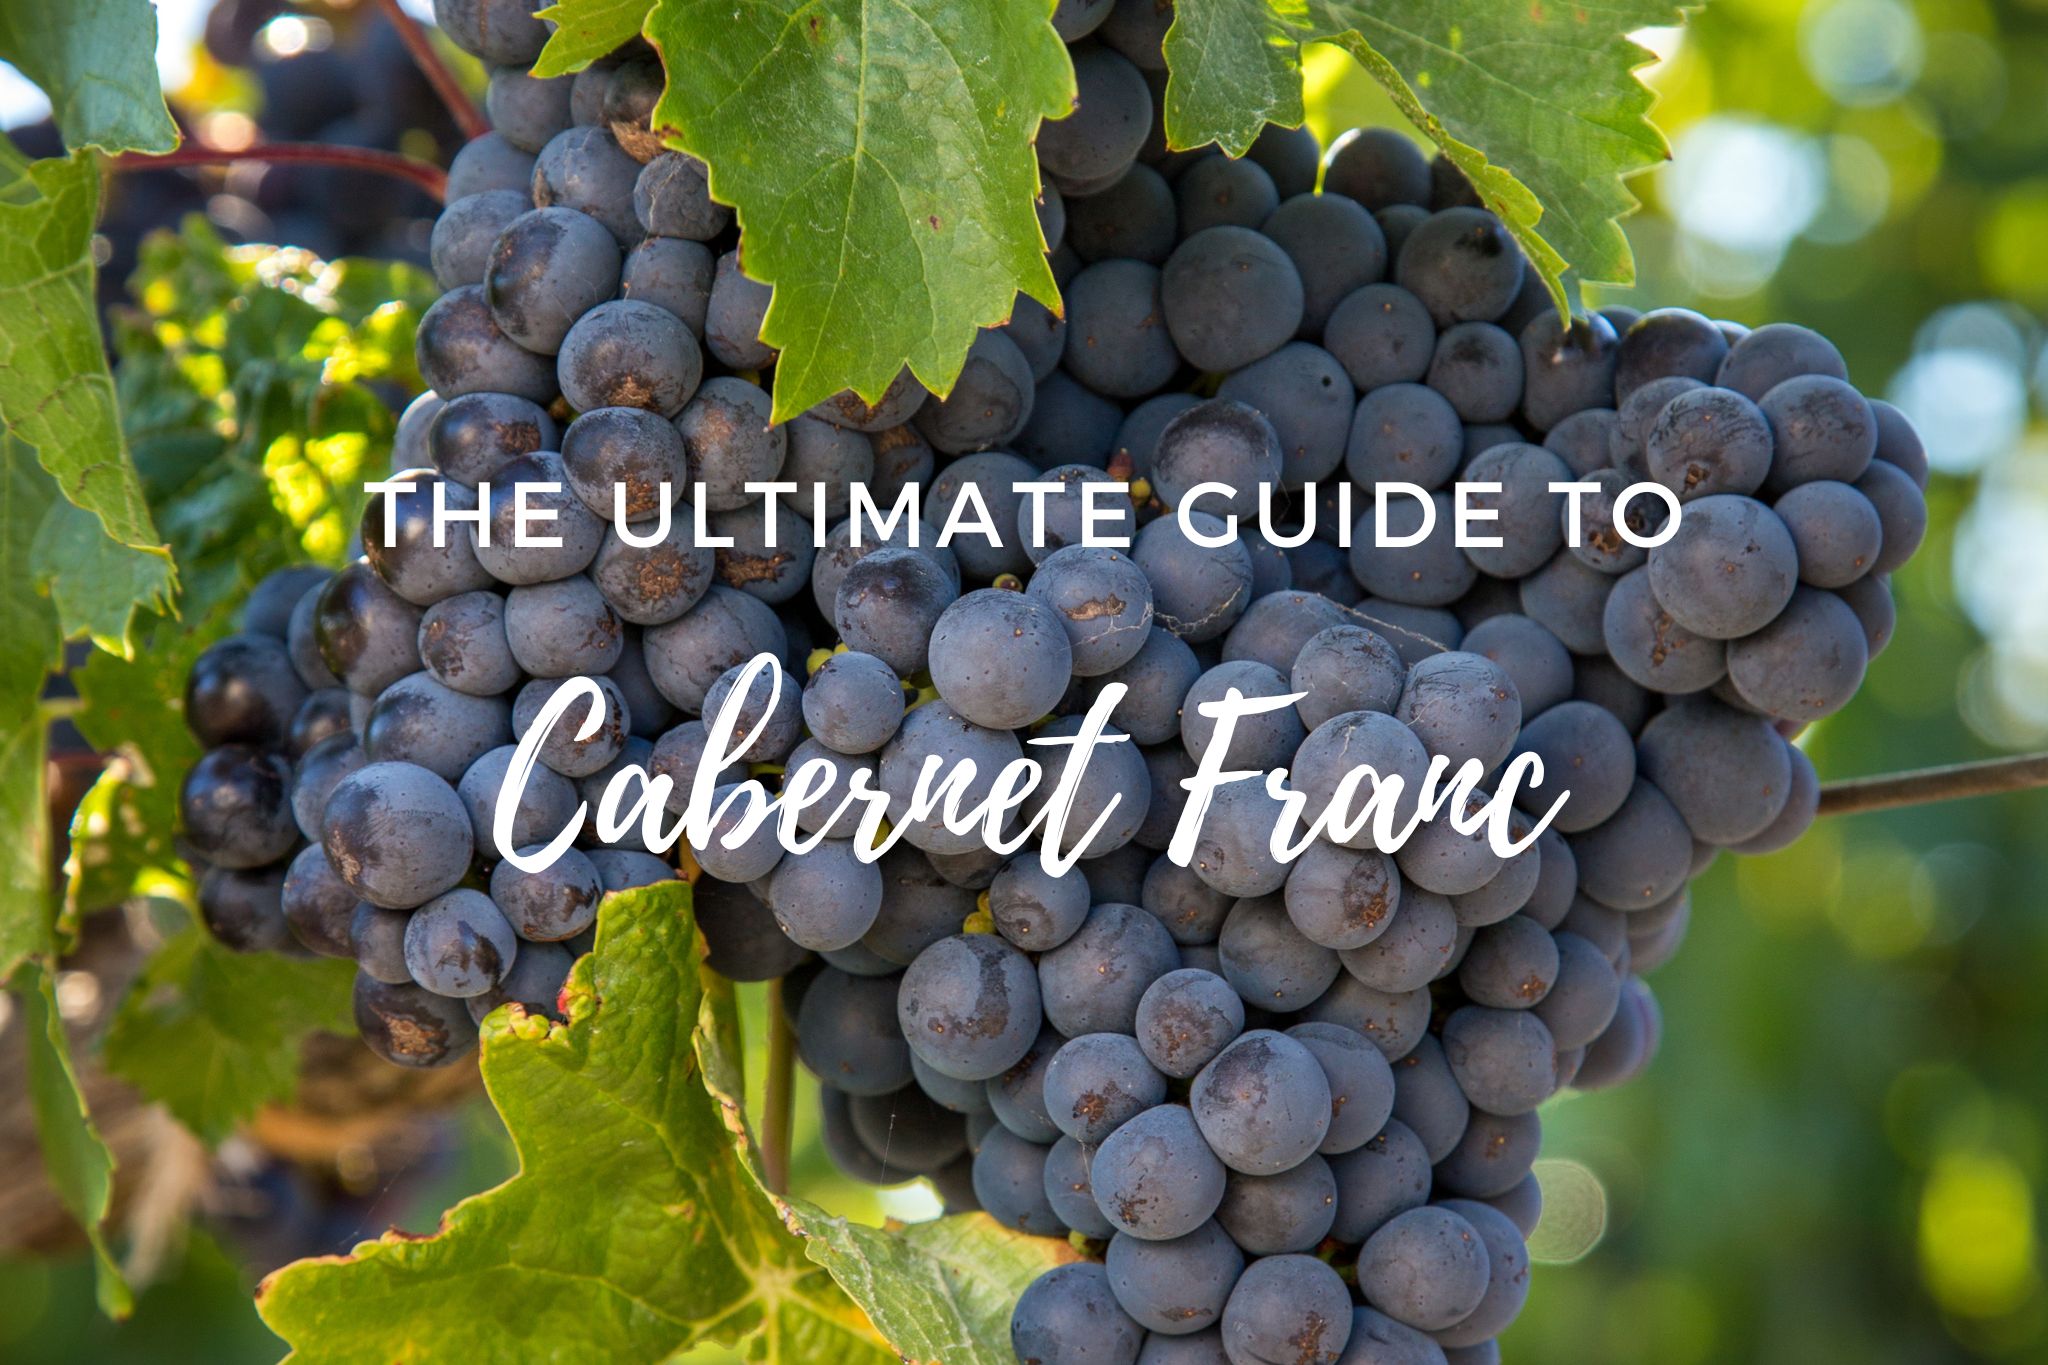 Guide to cabernet franc in south america on cabernet franc day, december 4